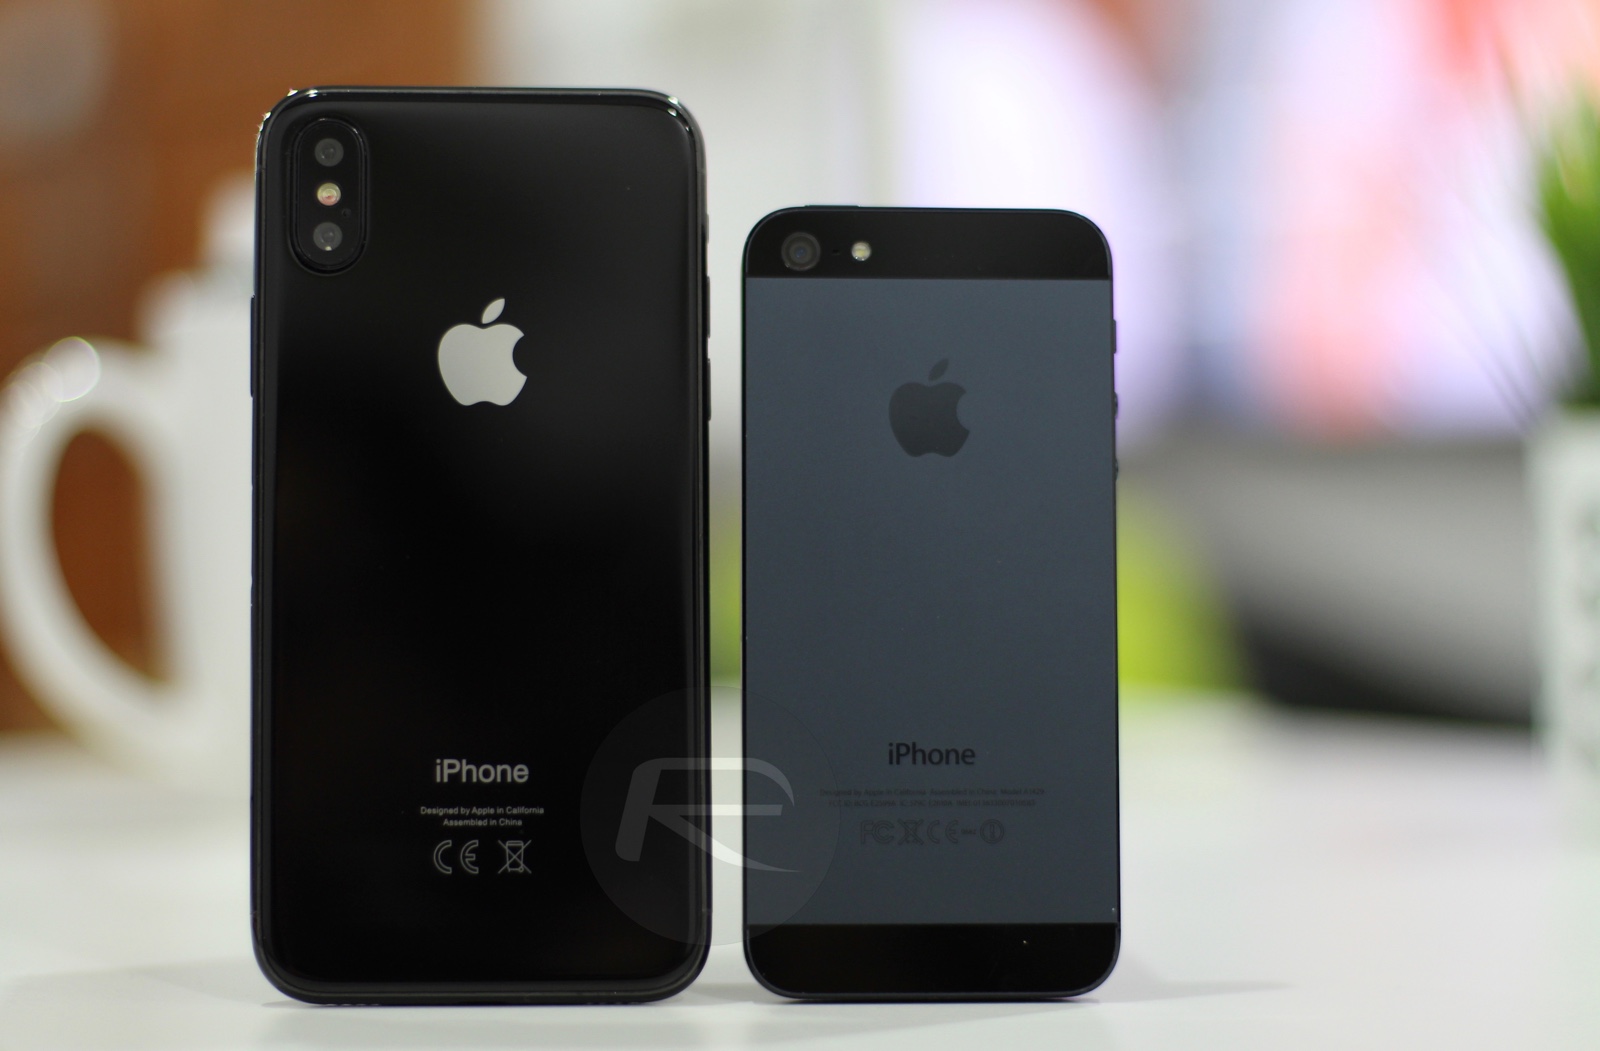 iPhone-8-black-with-iPhone-5